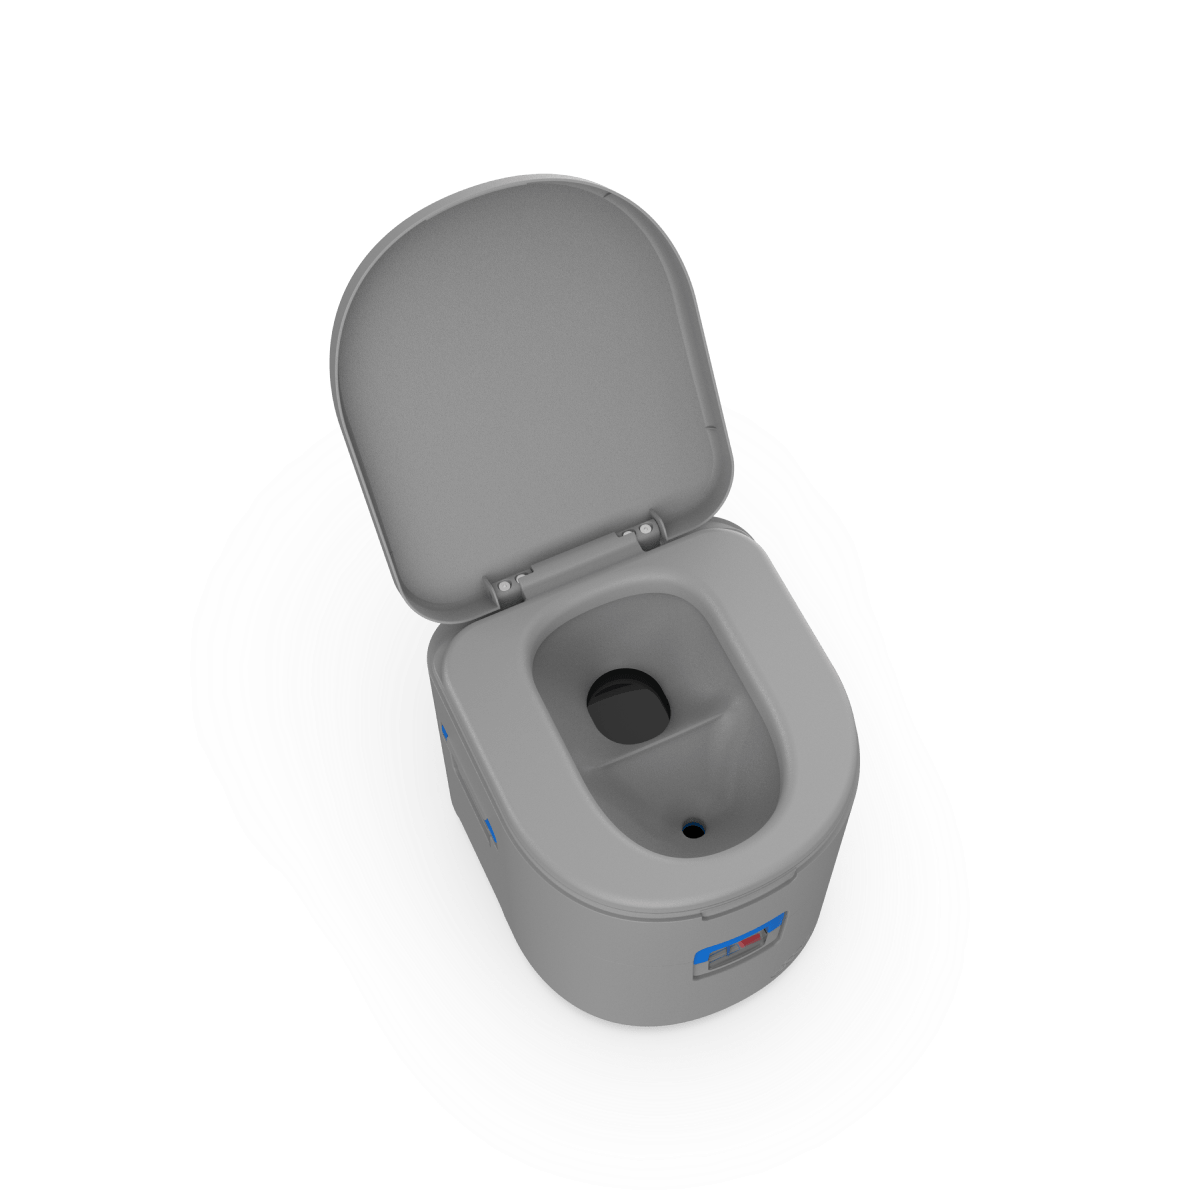 A top view of a portable toilet with Joolca branding with an open toilet lid